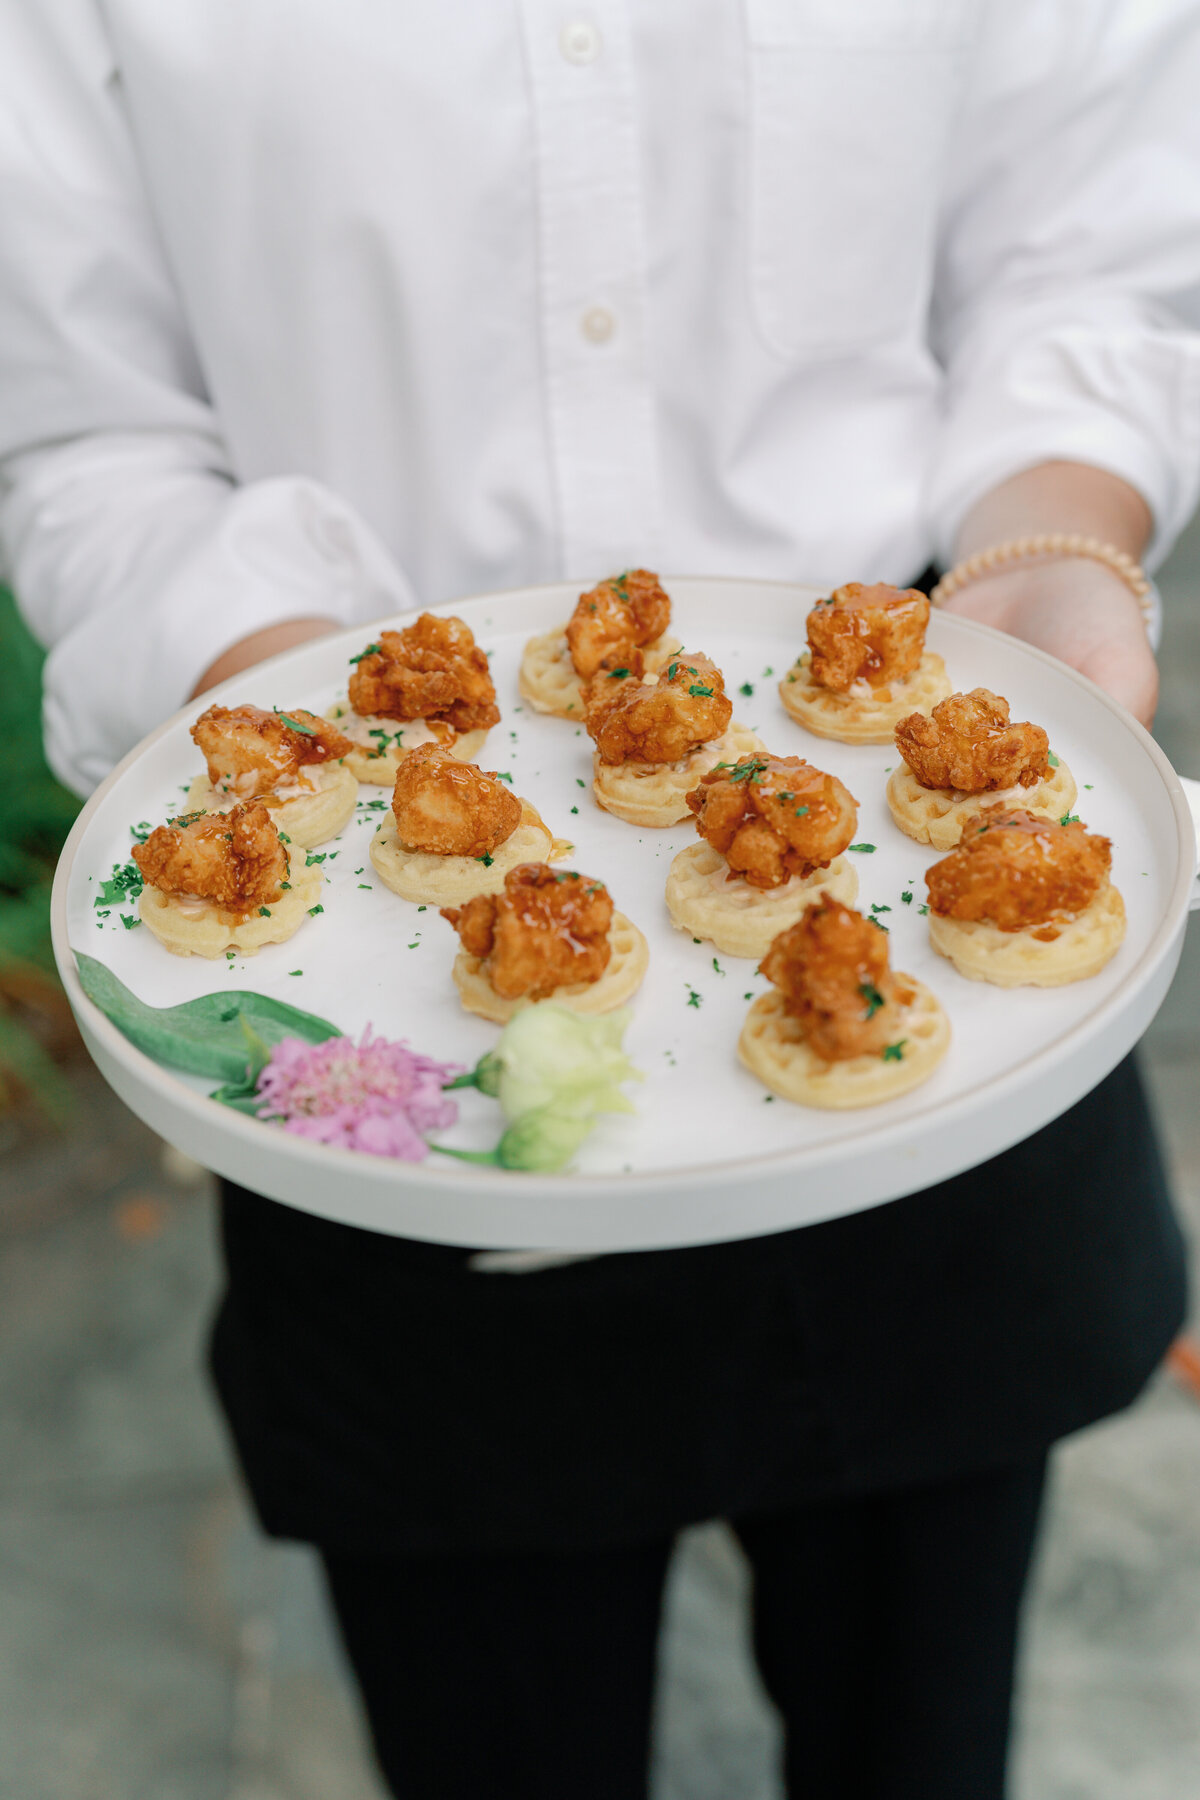 pphg_catering_chicken_waffles_passed_appetizers_william_aiken_house_outdoor_wedding_kailee_dimeglio_photography-1536